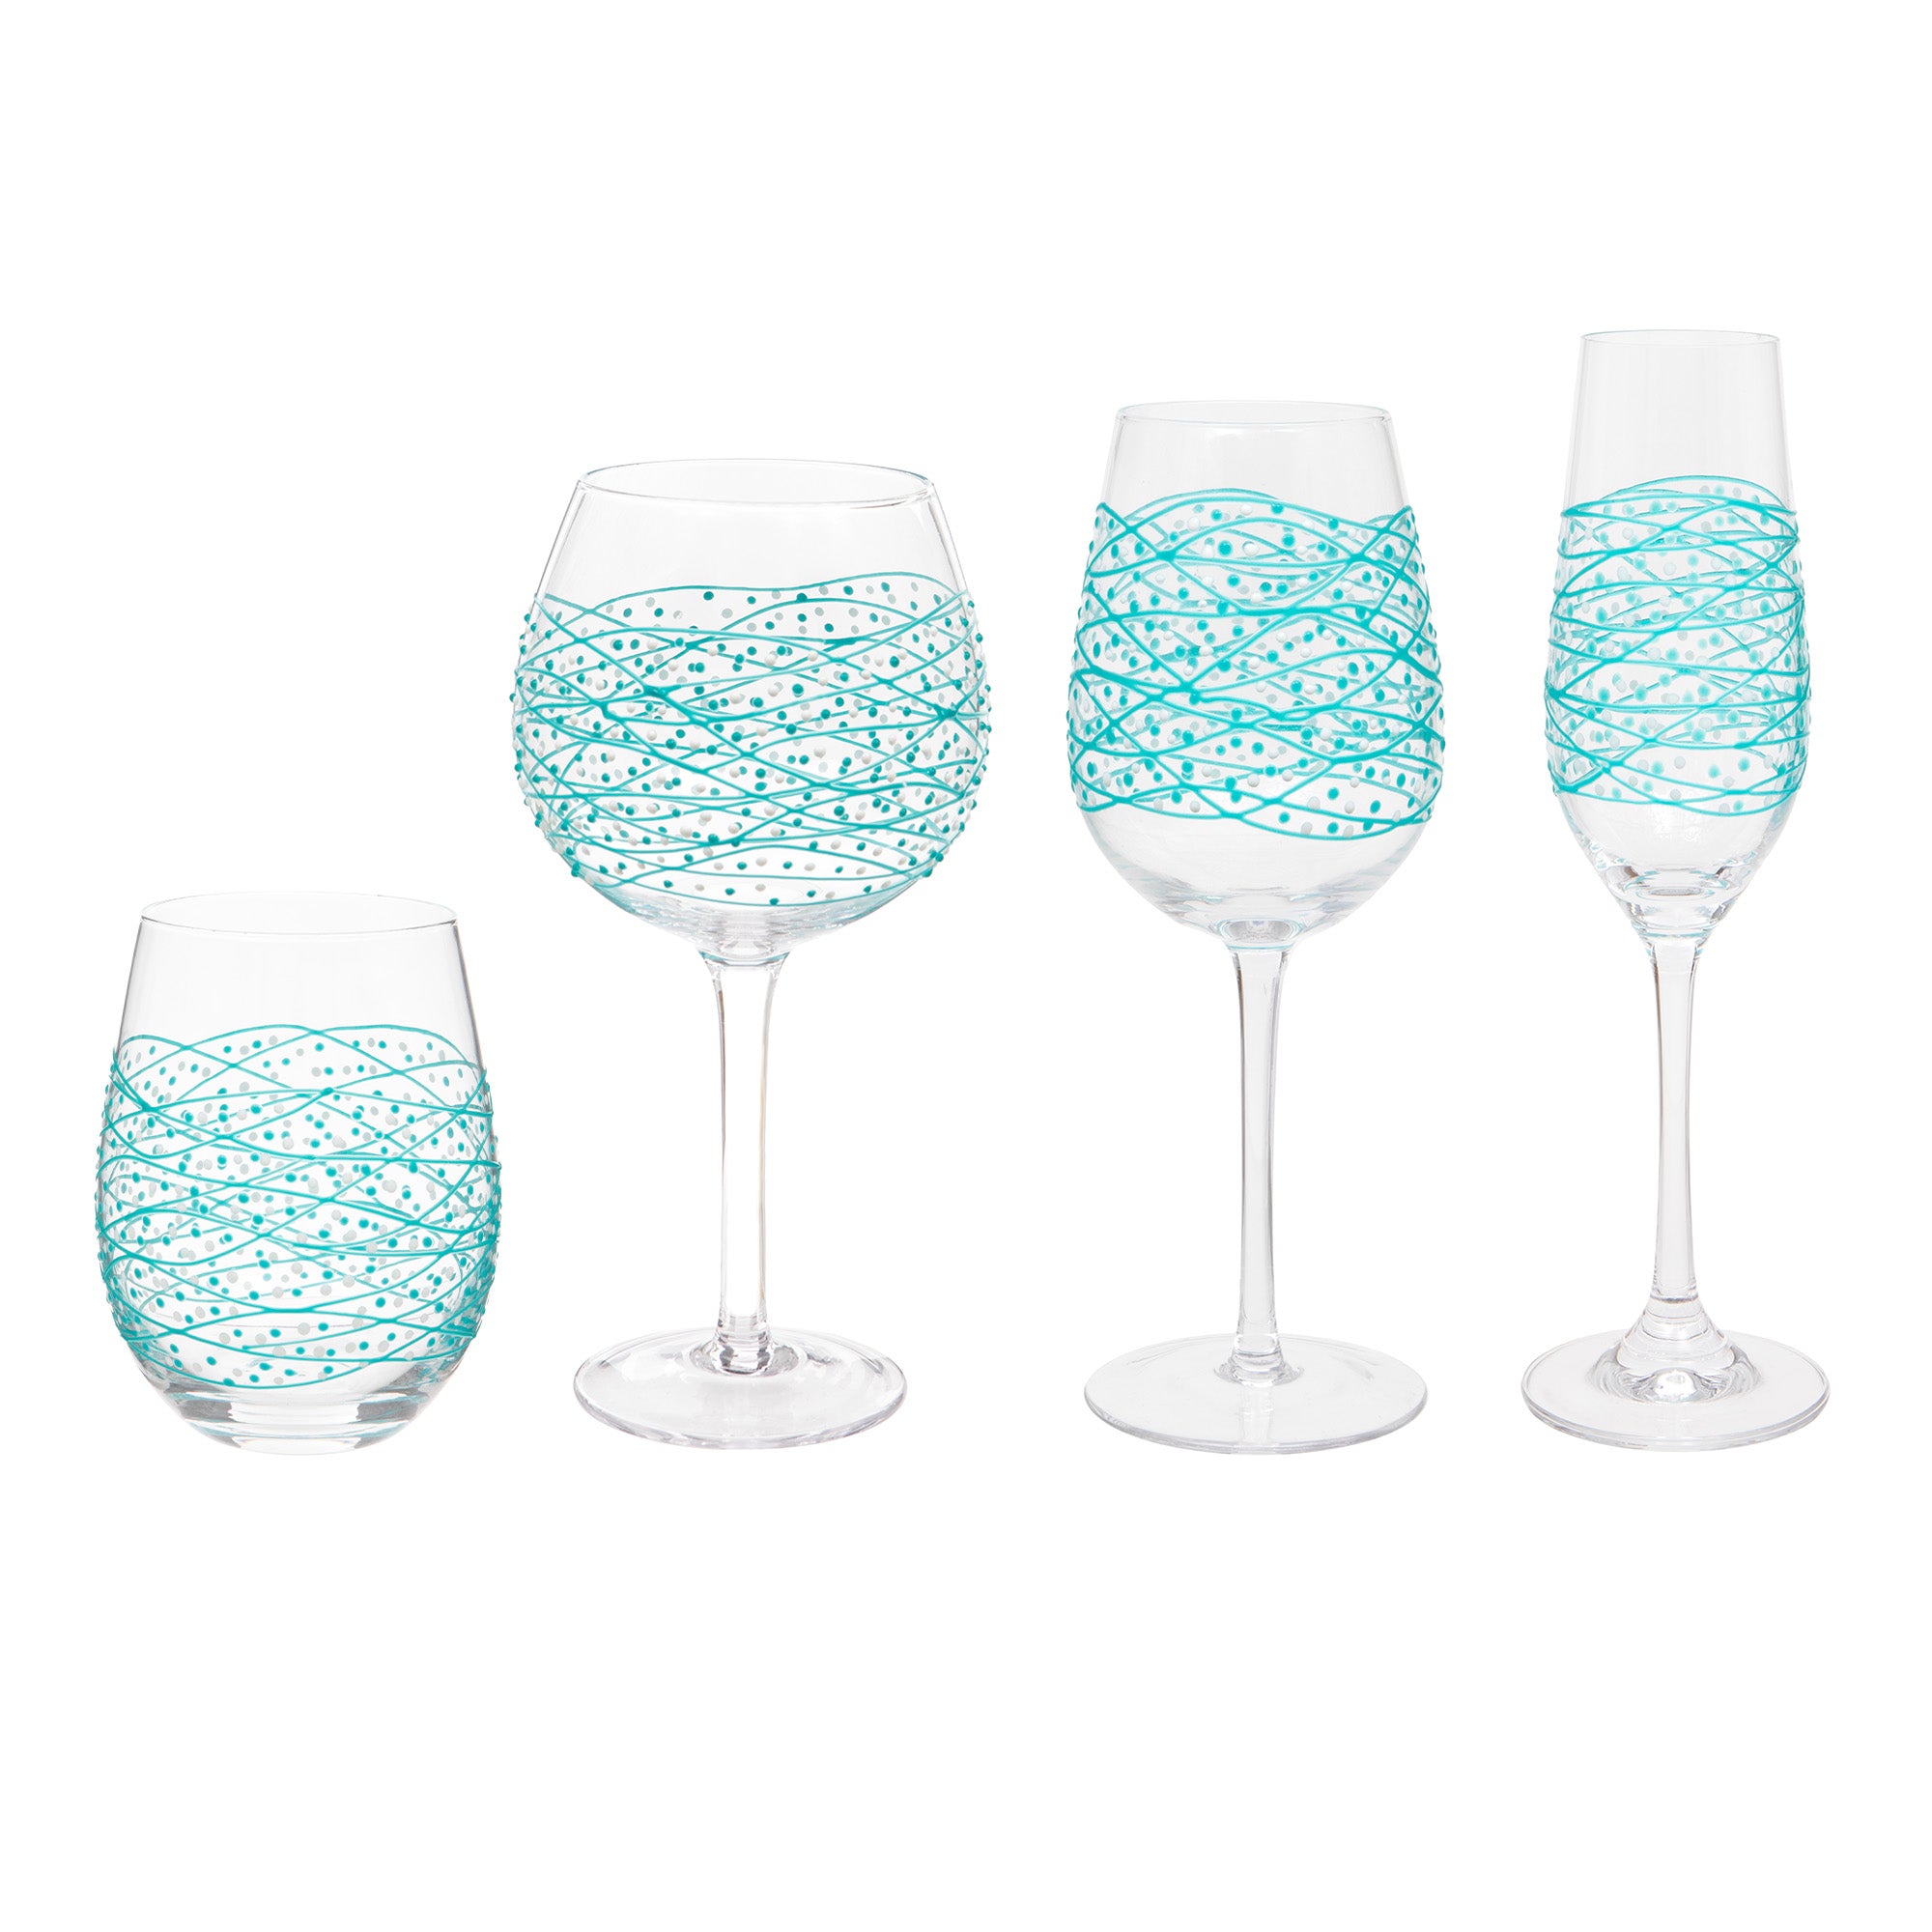 Hand Painted Turquoise Champagne Flute